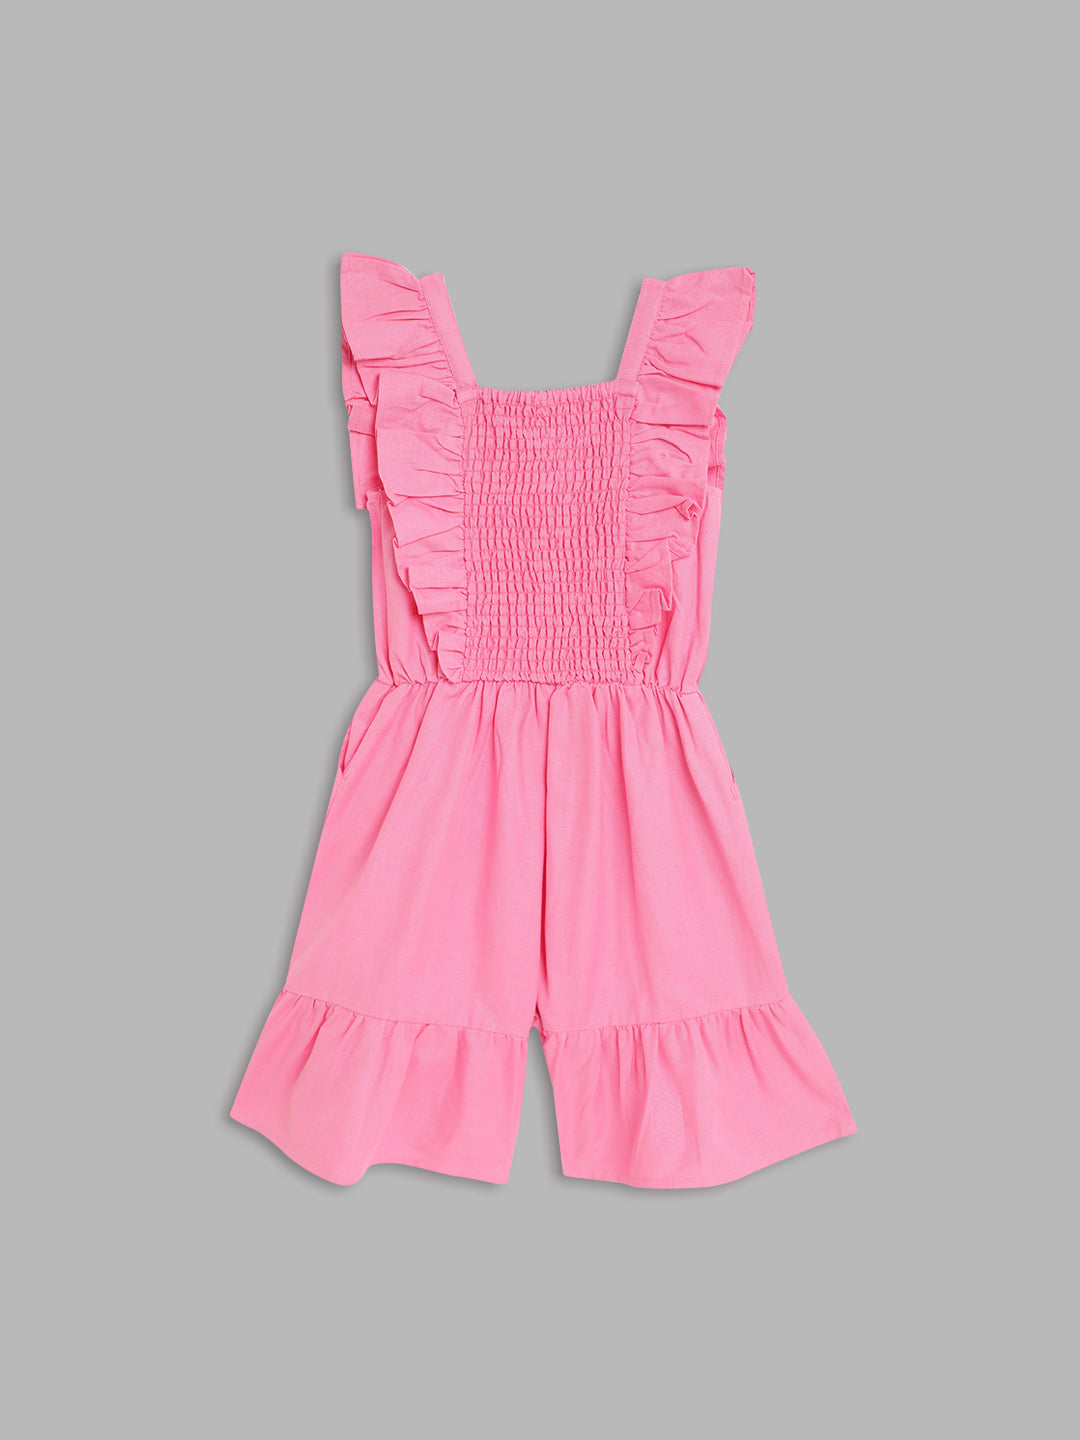 Blue Giraffe Girls Pink Embroidered Square Neck Playsuit